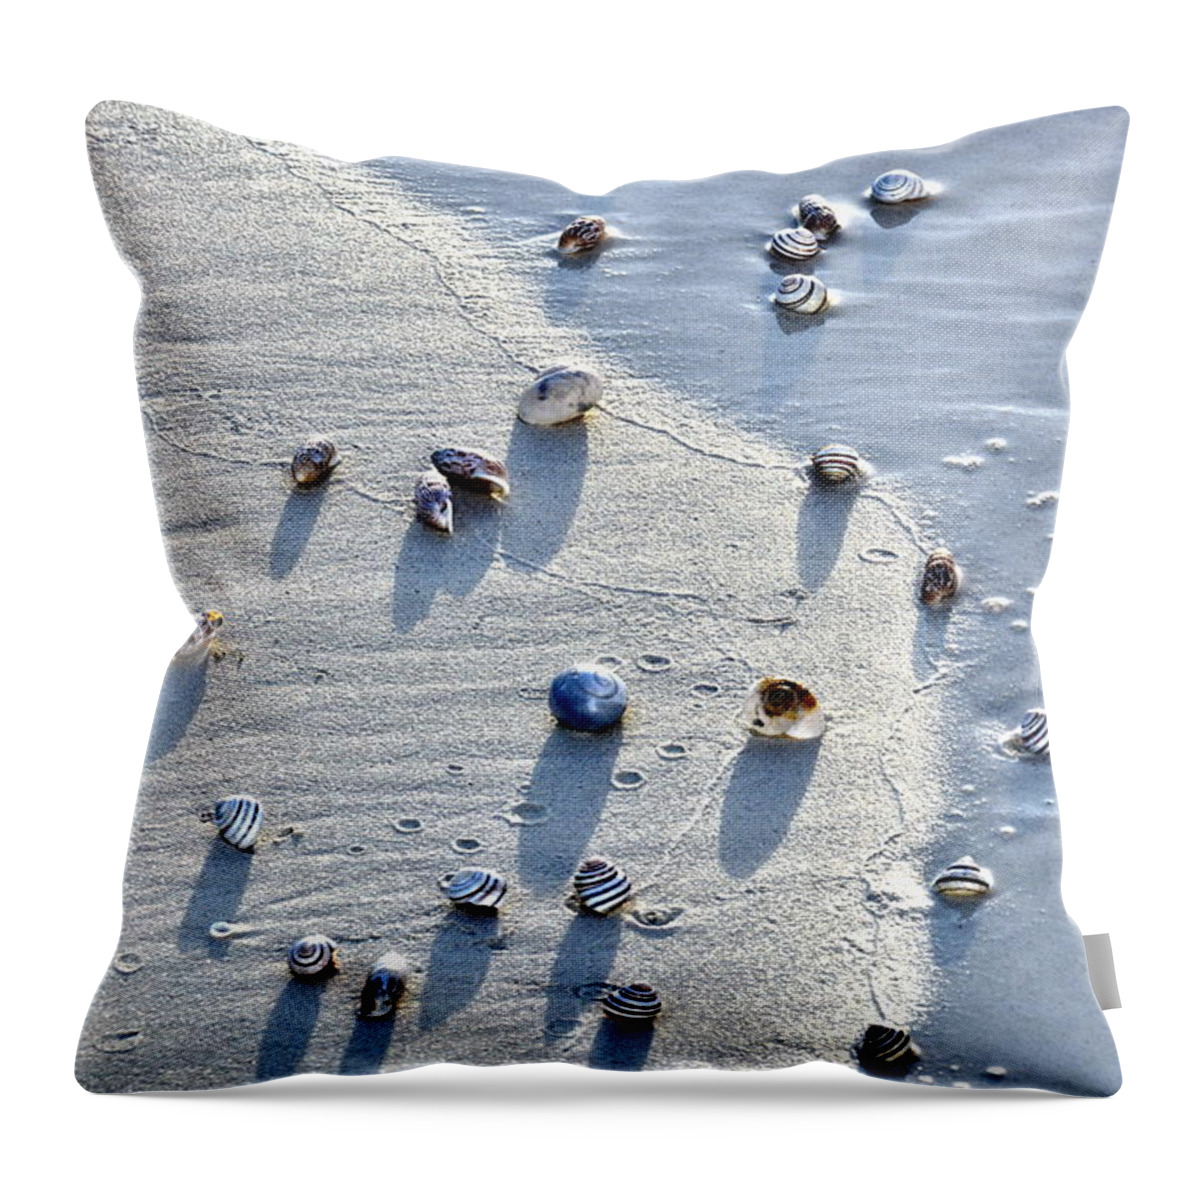 Shells Throw Pillow featuring the photograph Sea Shells at the Shore by Amy McDaniel